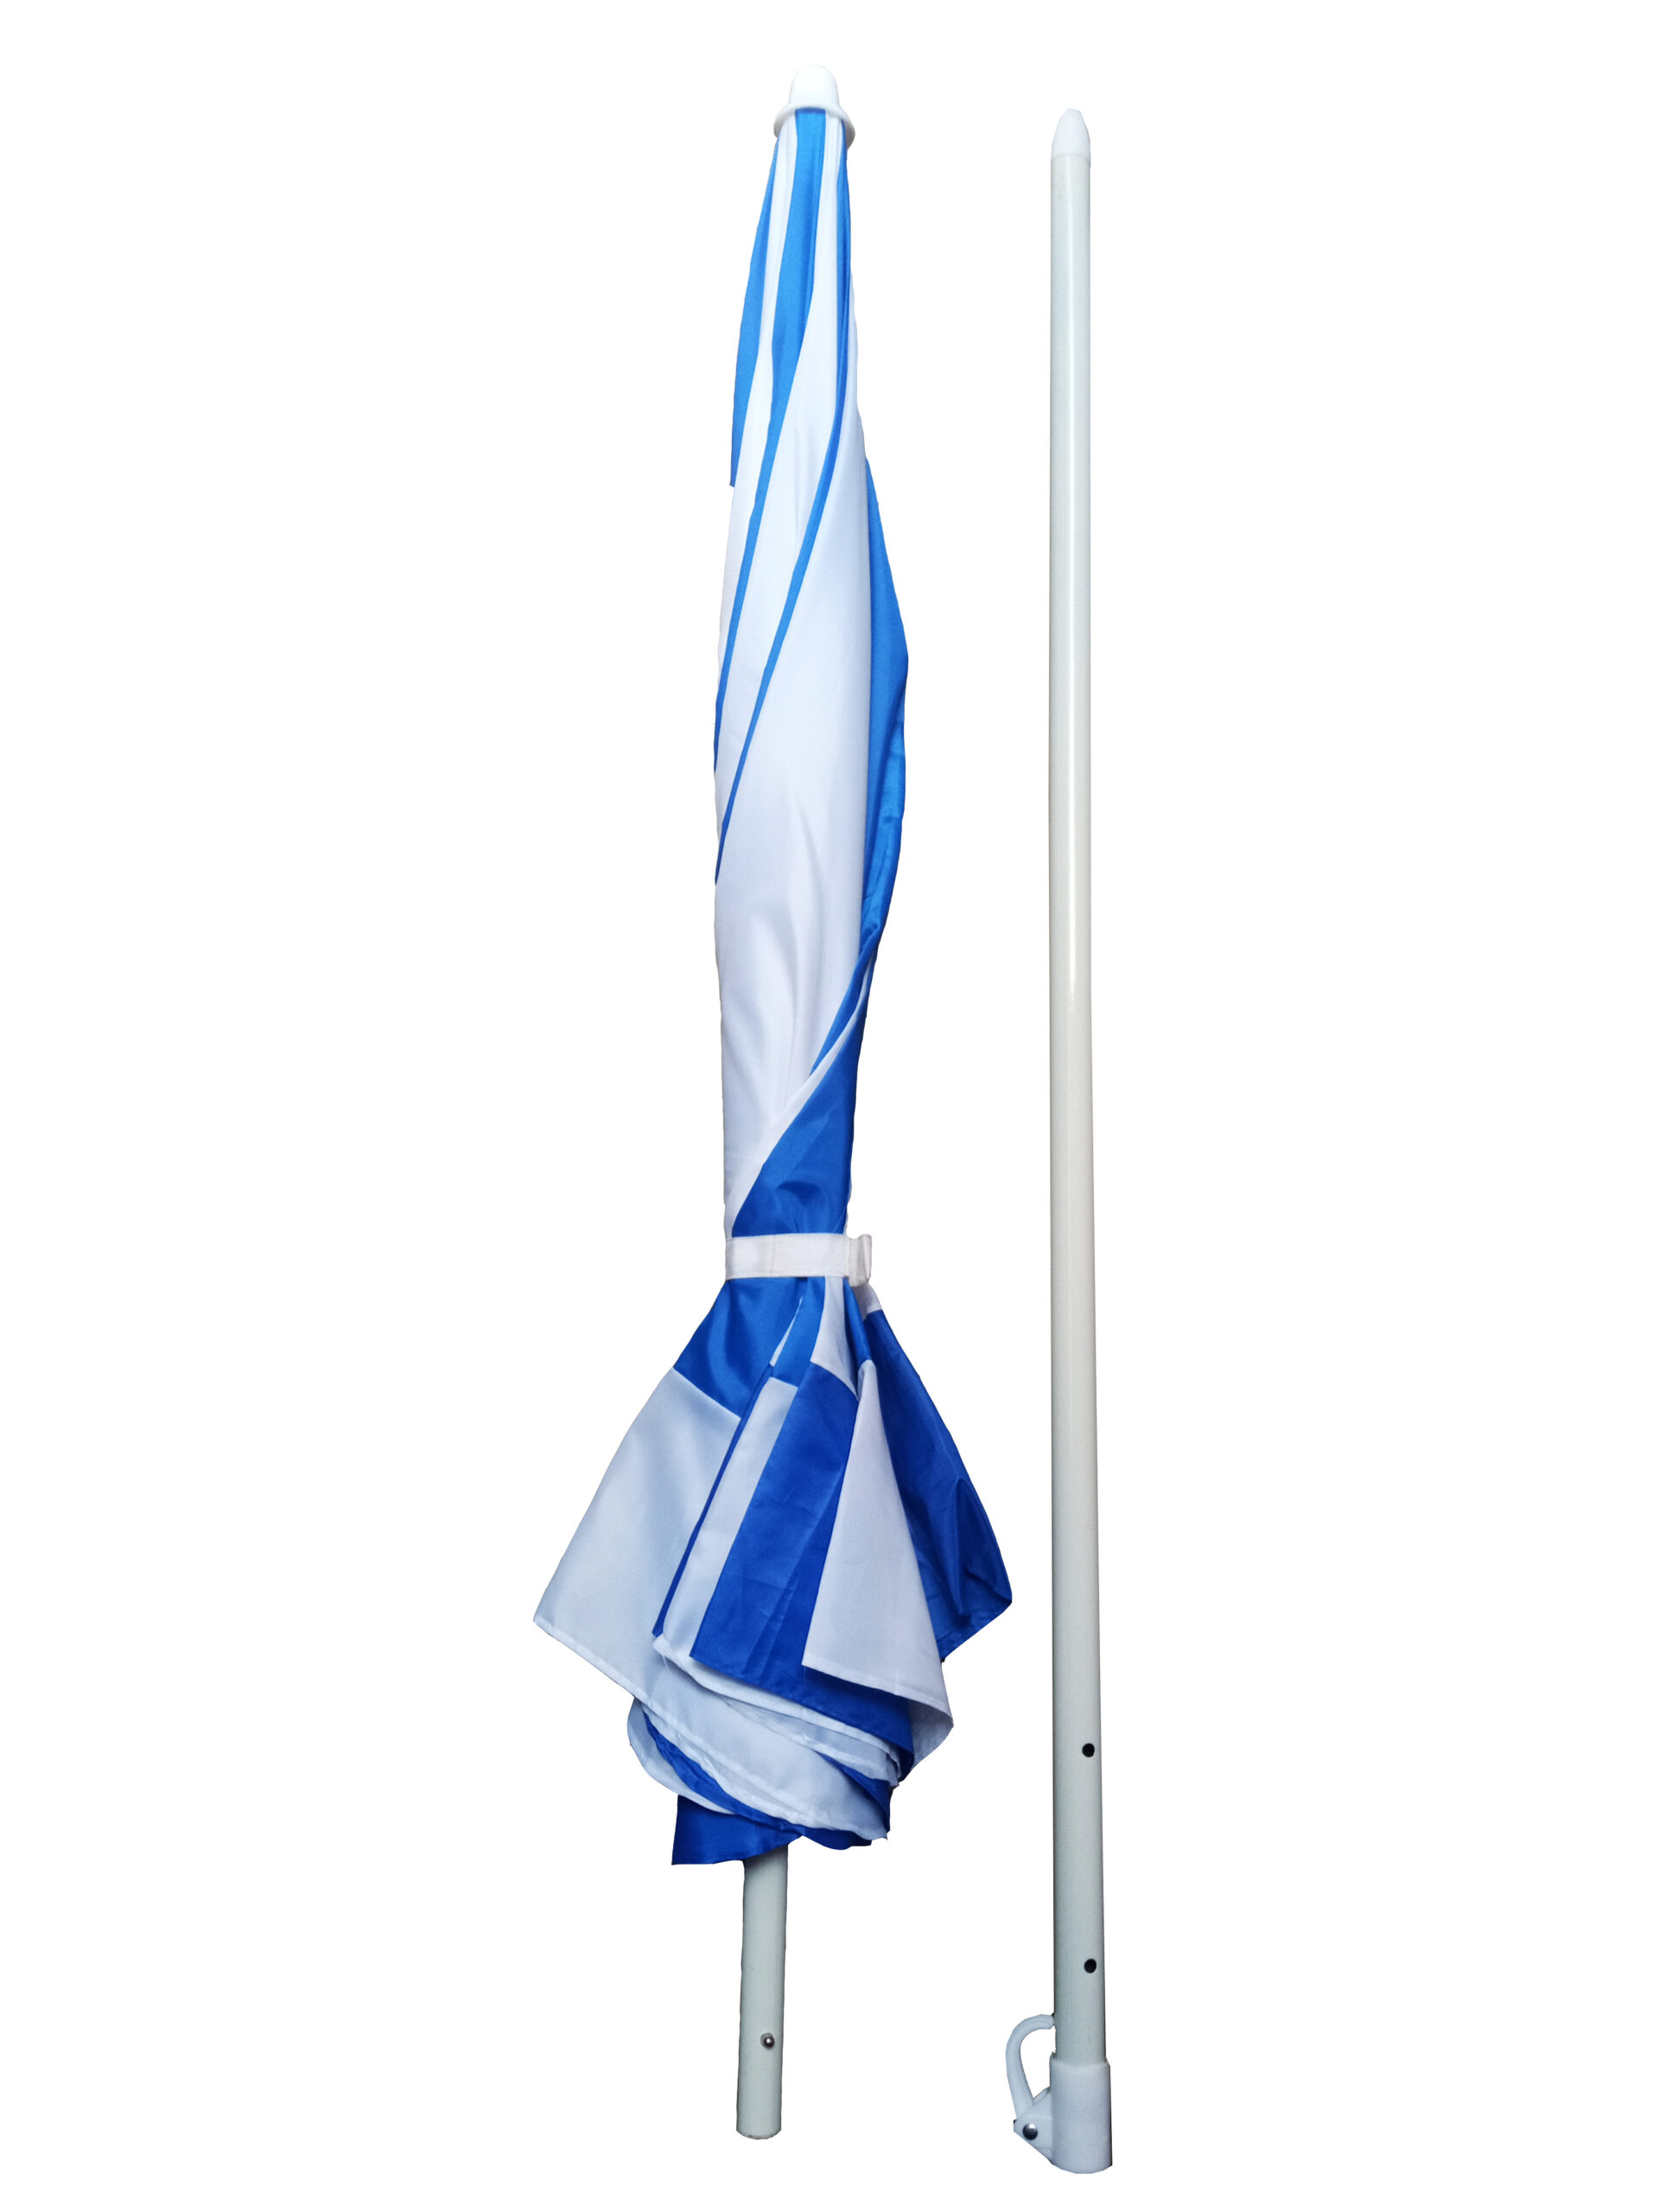 36 in/6ft Garden Umbrella with Stand (Blue & White)